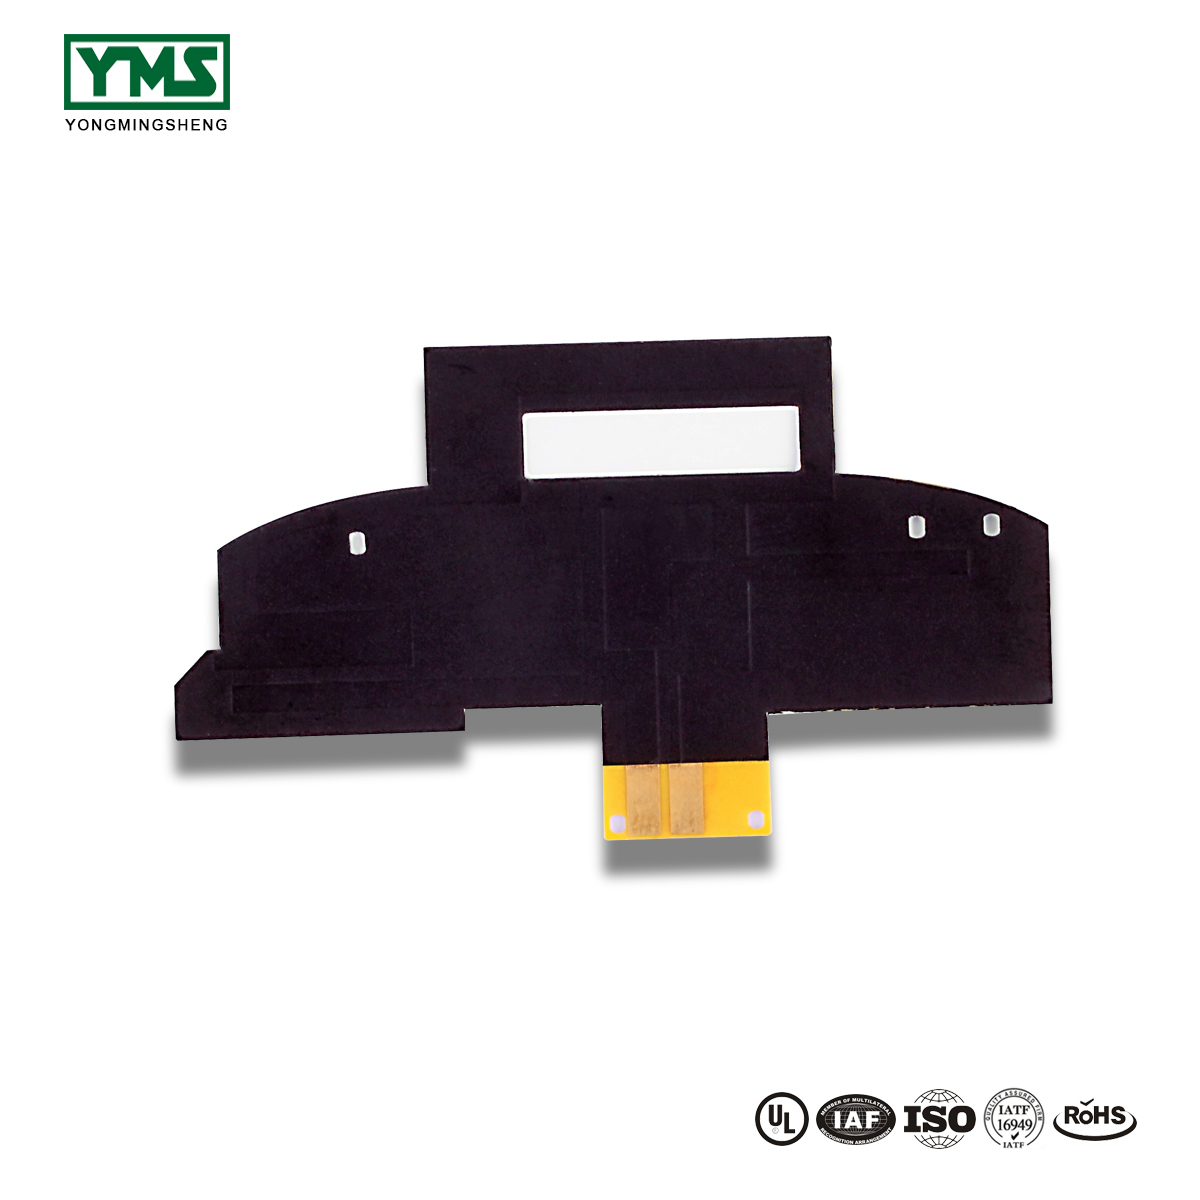 PriceList for 2layer Fpc With Stiffner - 1layer  Cem-3 Stiffener flexible board | YMSPCB – Yongmingsheng